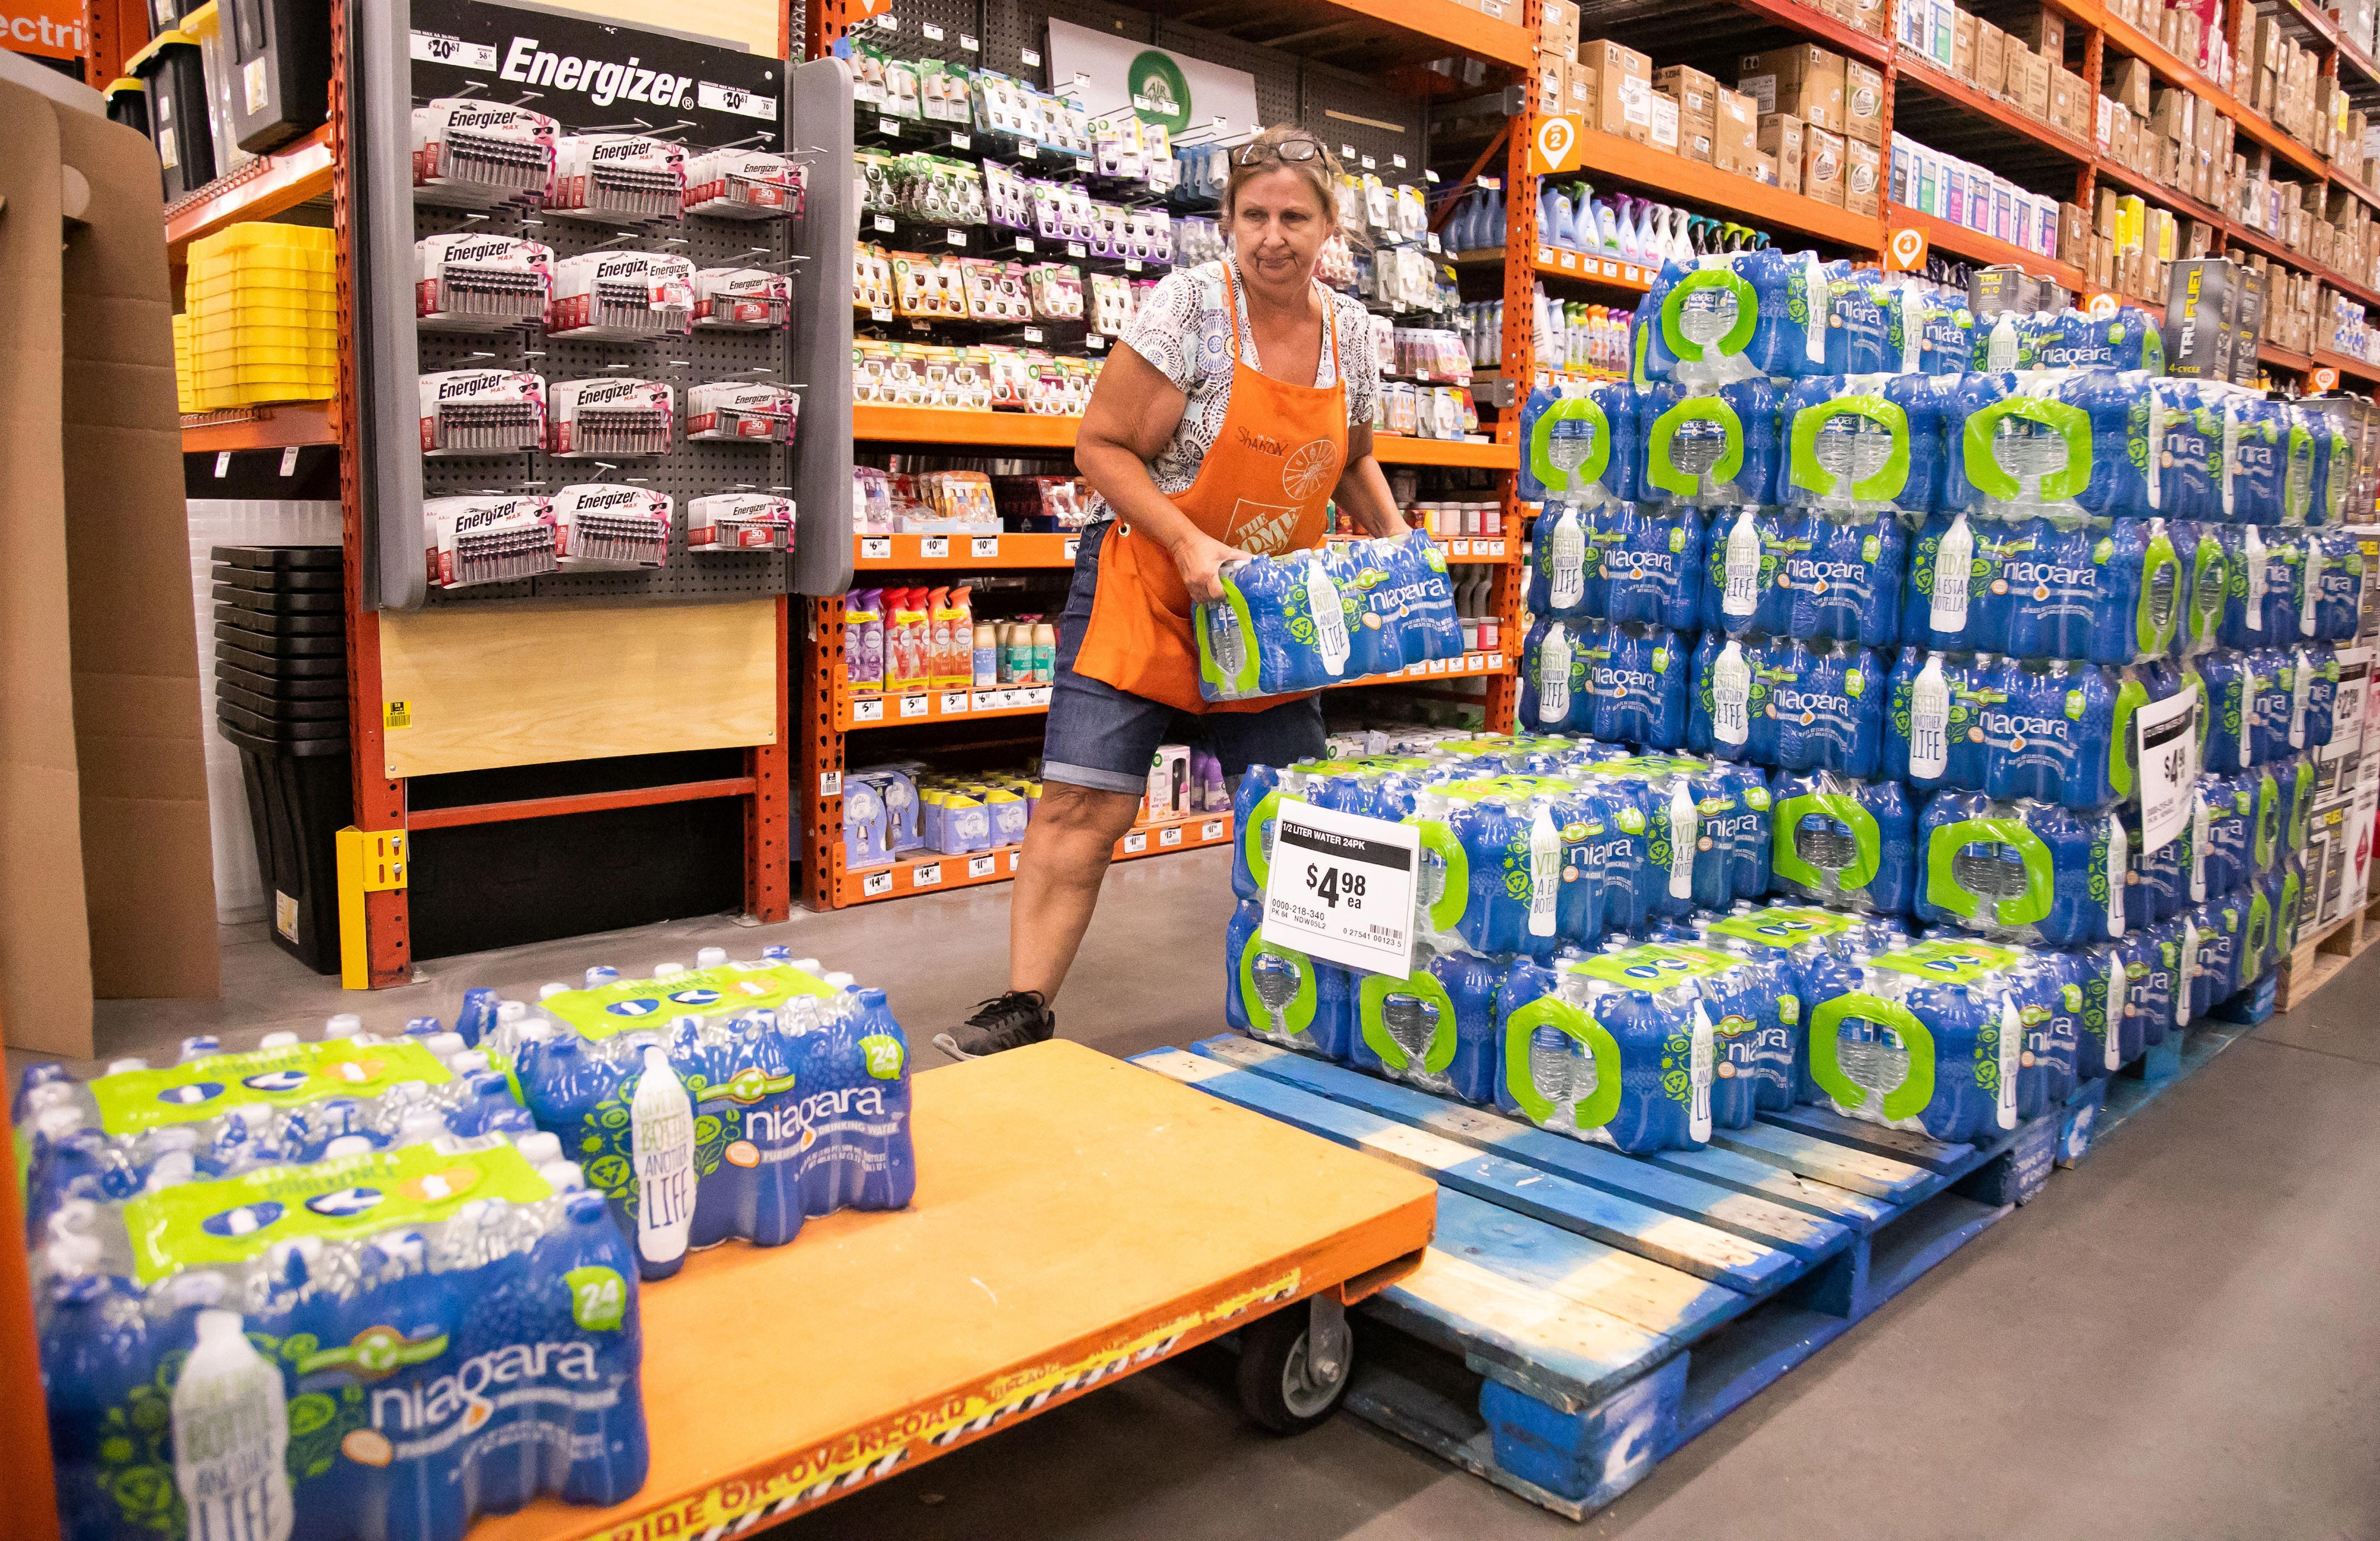 home depot acquires srs distribution in $18 billion purchase to attract more pro customers